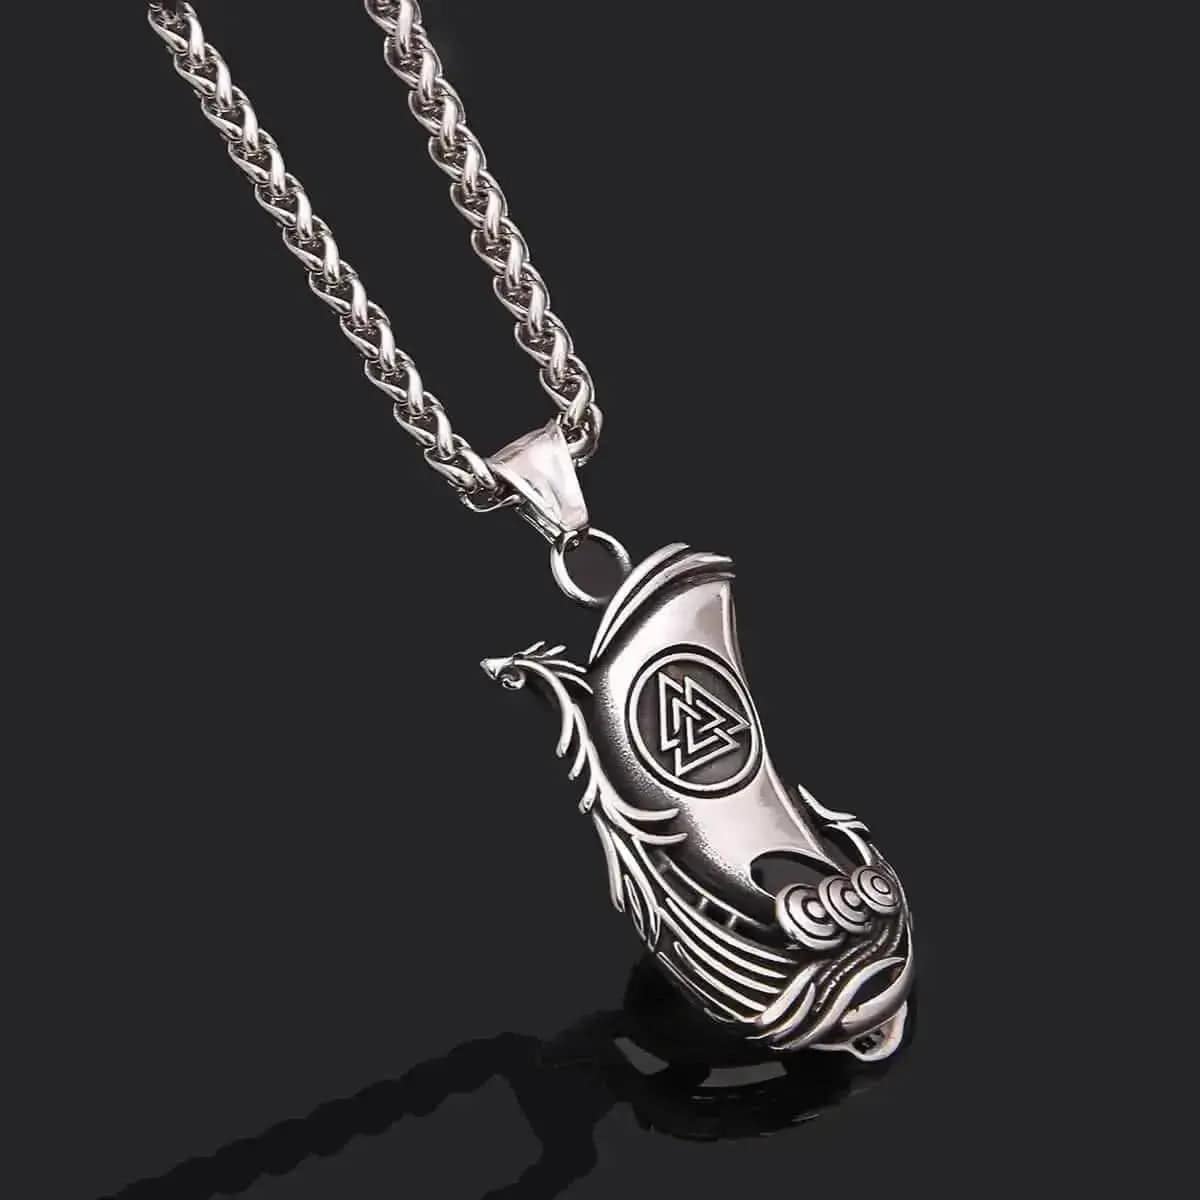 BROOCHITON Necklaces New Pendant Necklace Stainless Steel